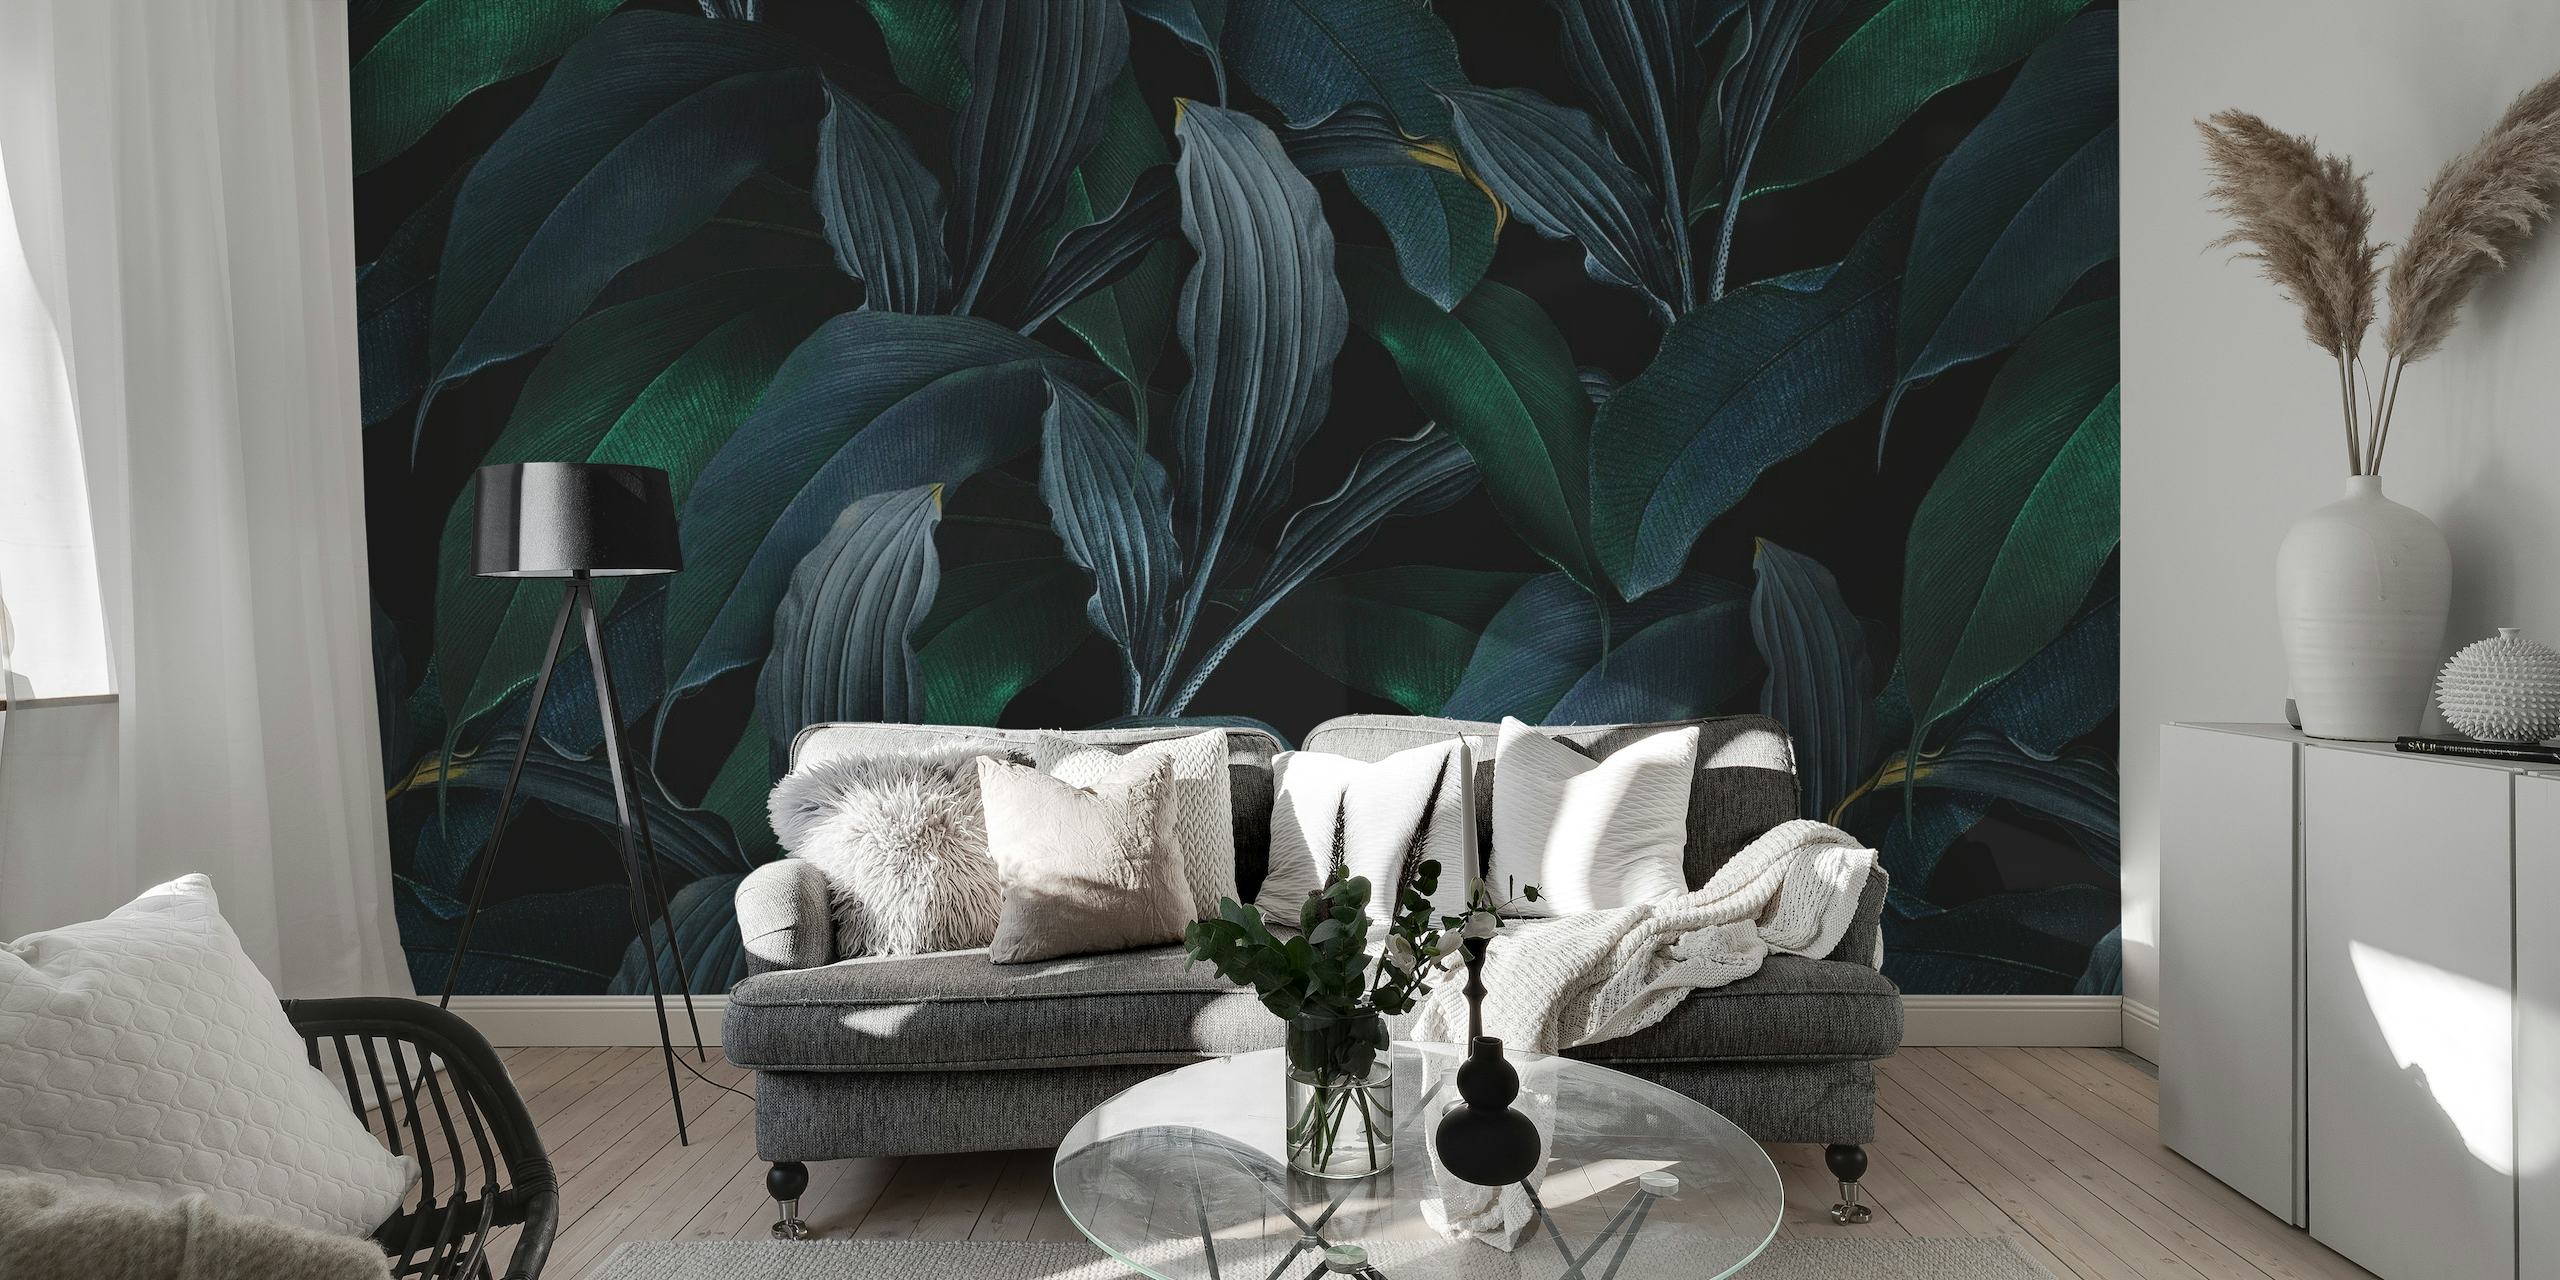 Gothic-style dark green botanical wall mural with subtle golden accents